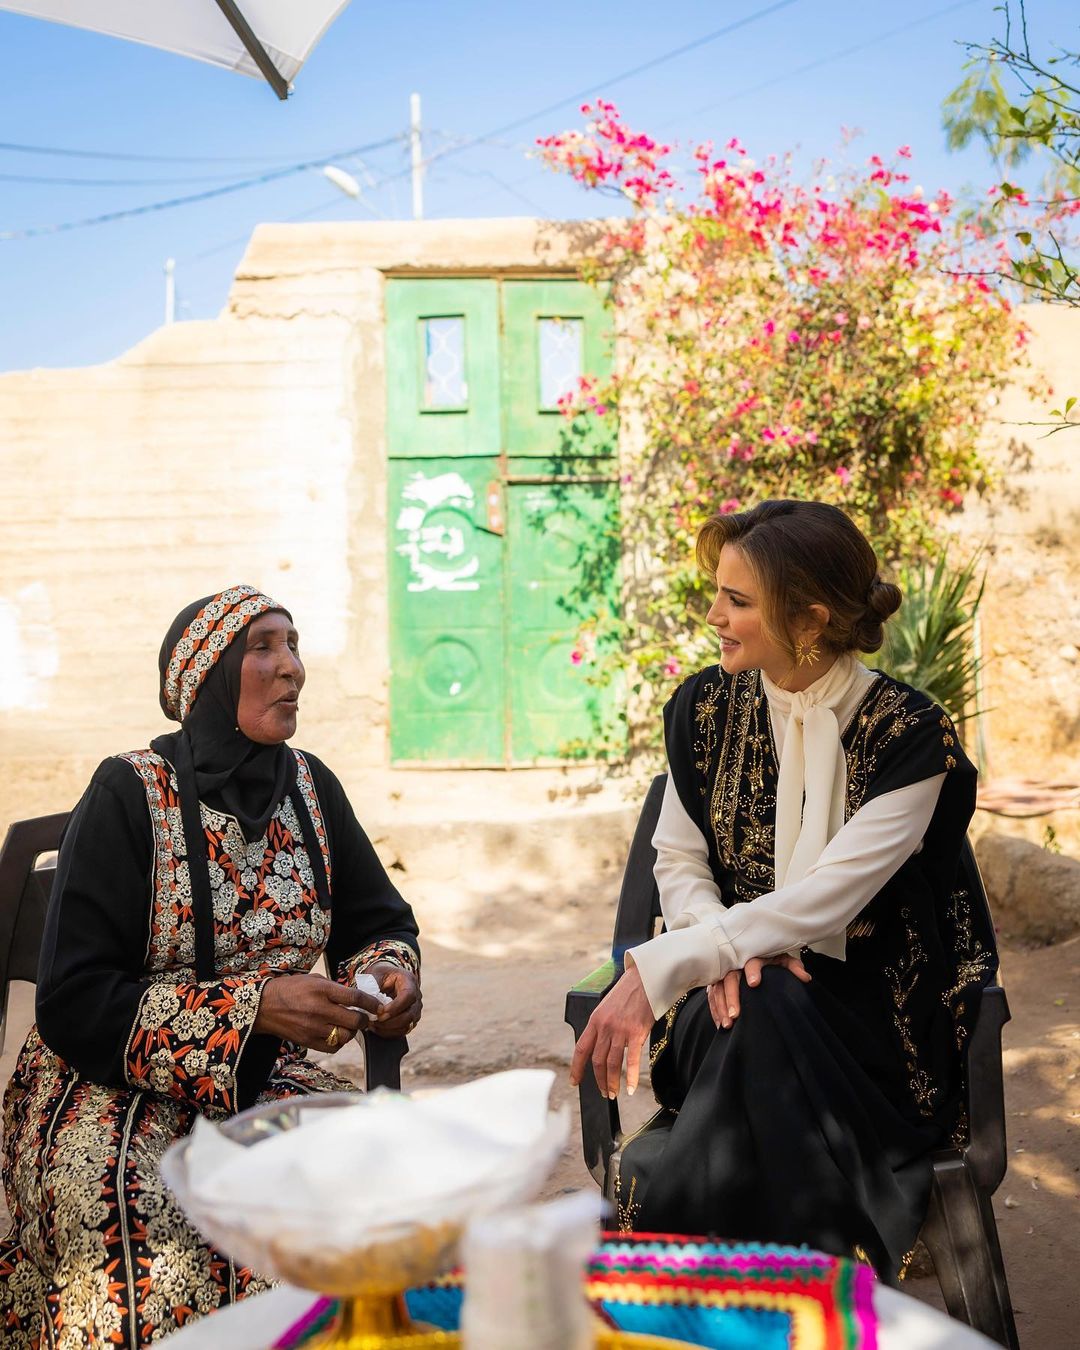 Queen Rania of Jordan visited  Ghor Al Safi in Al Karak Governorate where she met with Ghor Al Safi Women’s Association for Social Development board of directors and a number of its beneficiaries